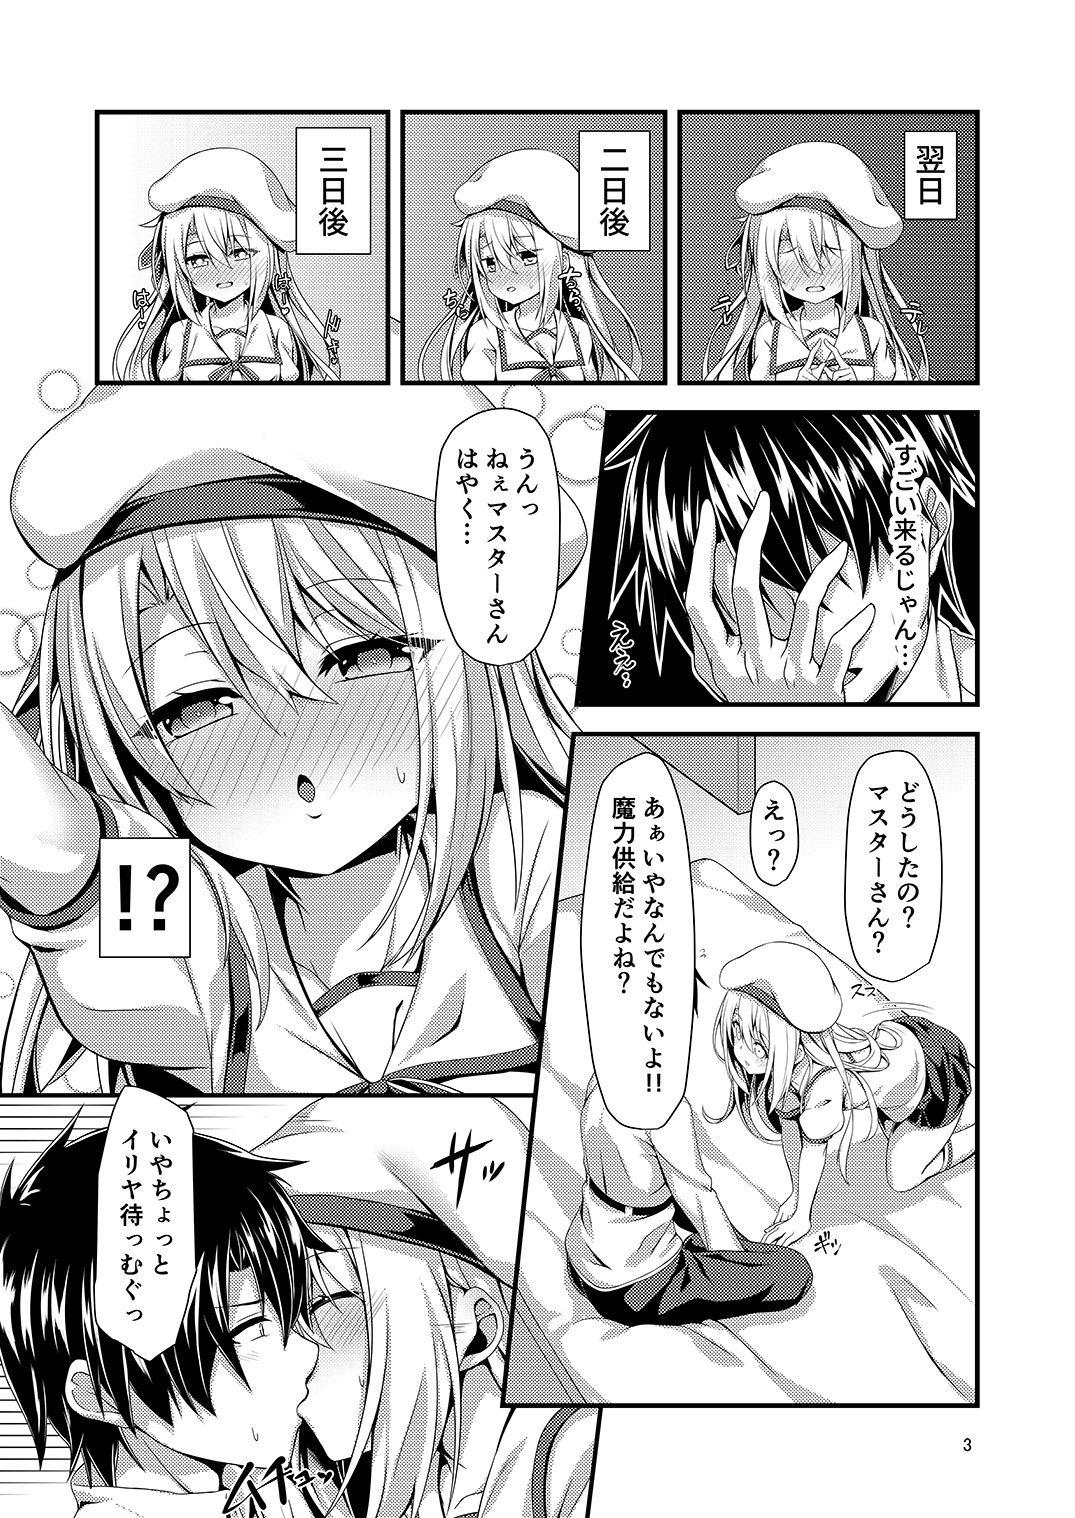 Consolo Ama Love Illya - Fate grand order Fate kaleid liner prisma illya Seduction - Page 5